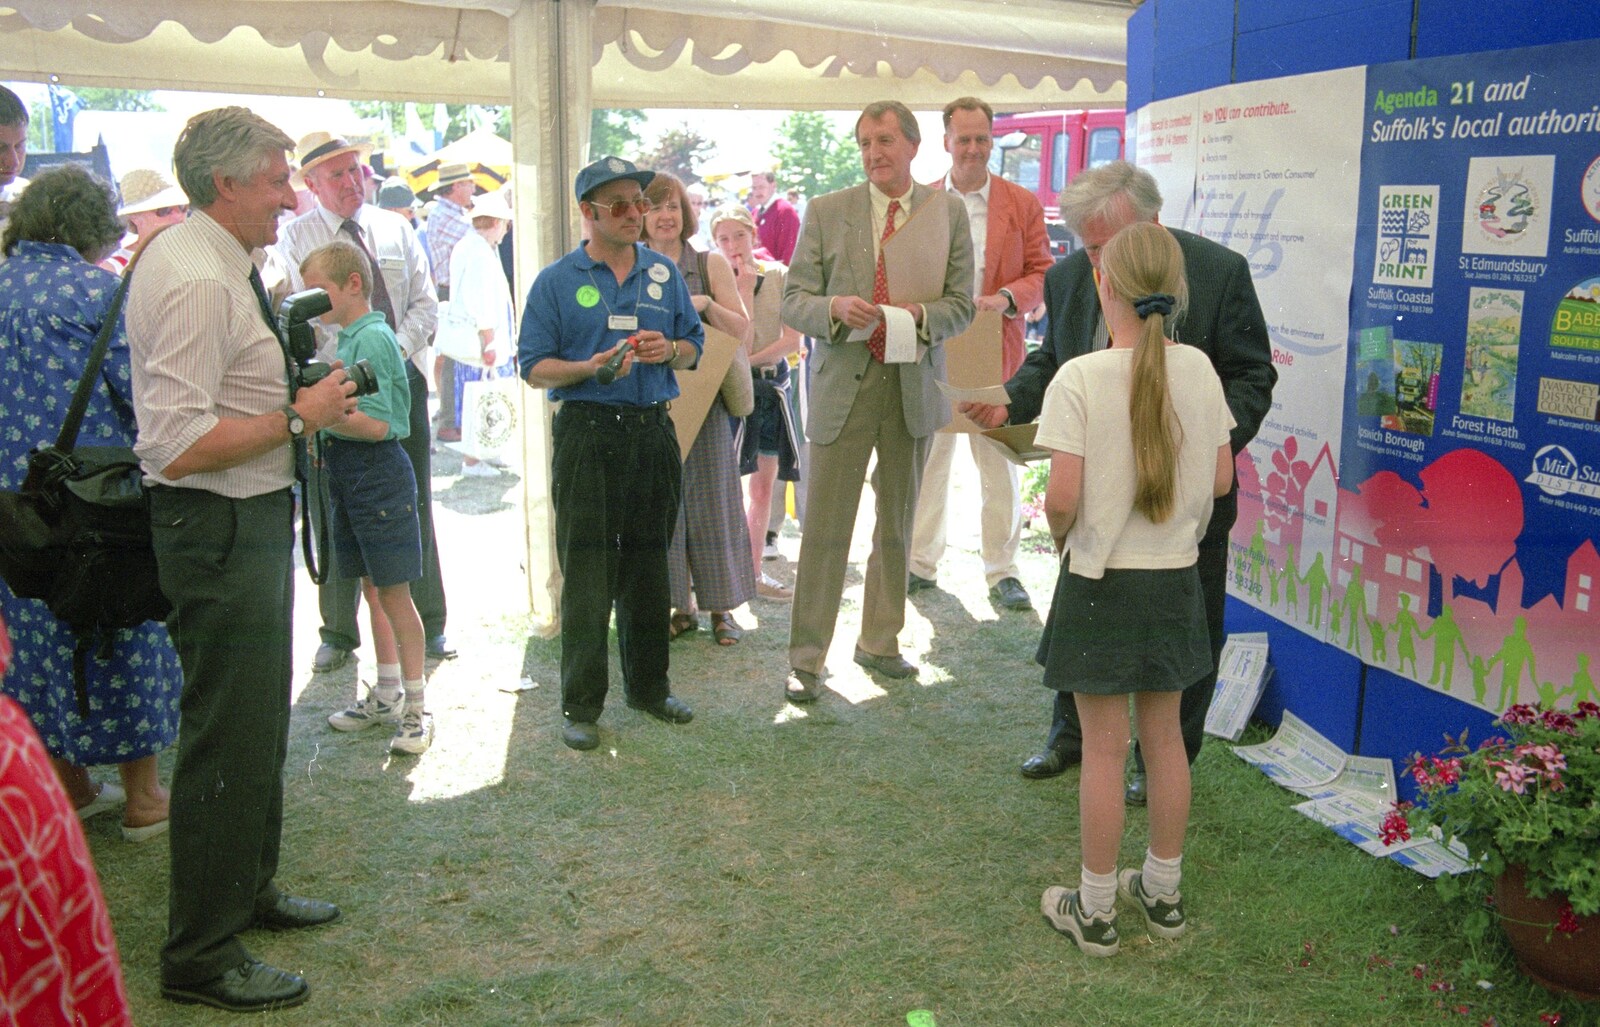 A schoolgirl is presented with something from CISU do 'Internet-in-a-field', Suffolk Show, Ipswich - May 21st 1997